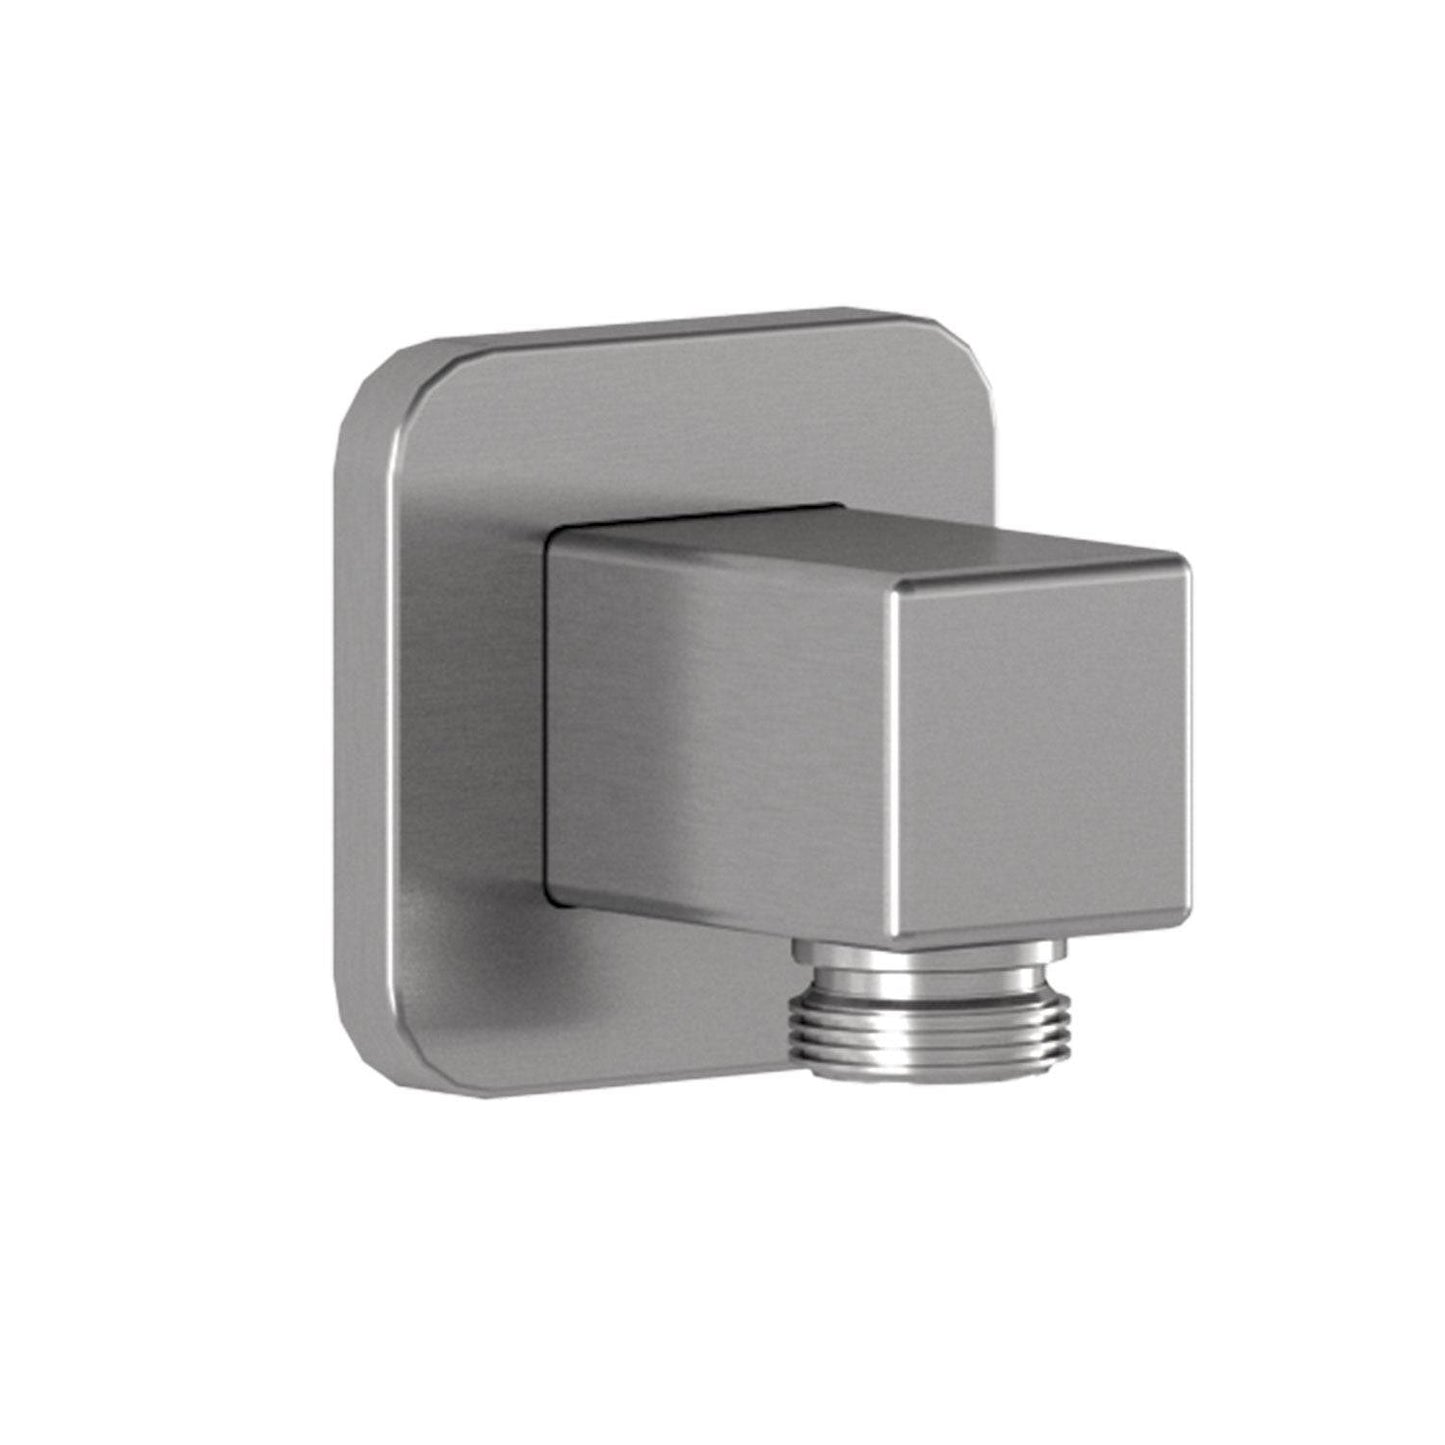 Kalia Square Shower Wall Outlet- Pure Nickel PVD